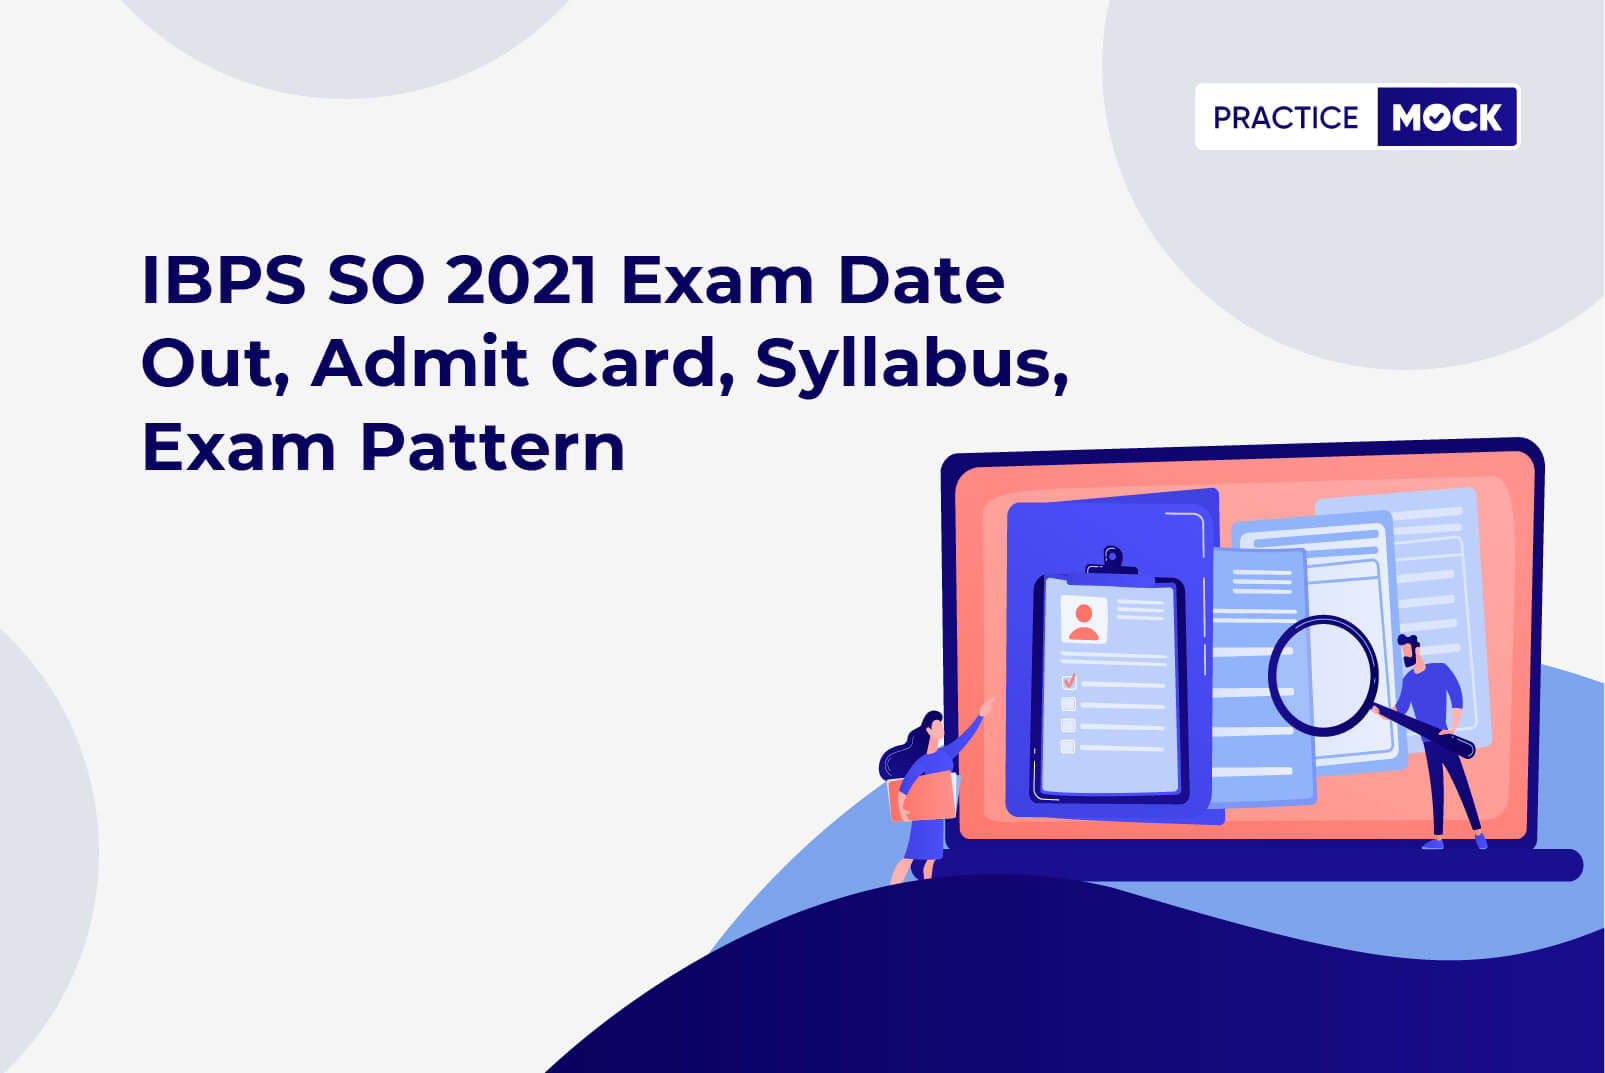 IBPS SO 2021 Exam Date Out, Admit Card, Syllabus, Exam Pattern